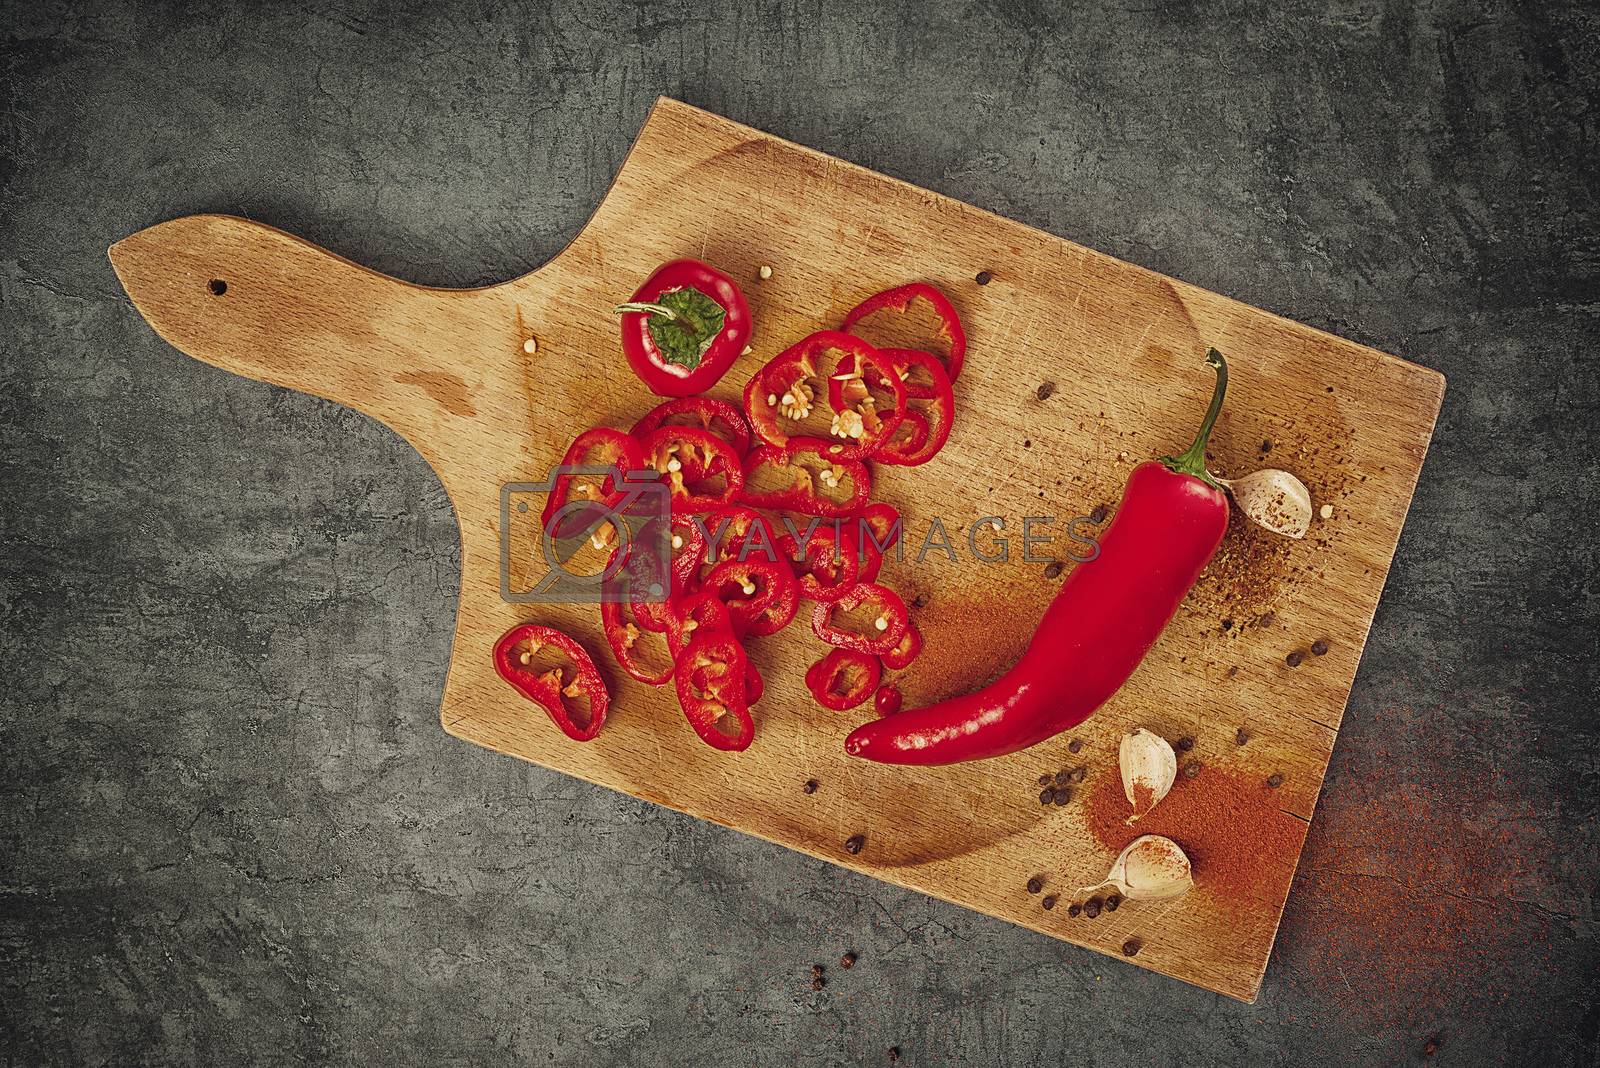 Red Hot Chili Pepper, Spice and Organic Garlic on Wooden Kitchen Plate as Hot Food Ingredients for Spicy Piquant Cuisine, Top View